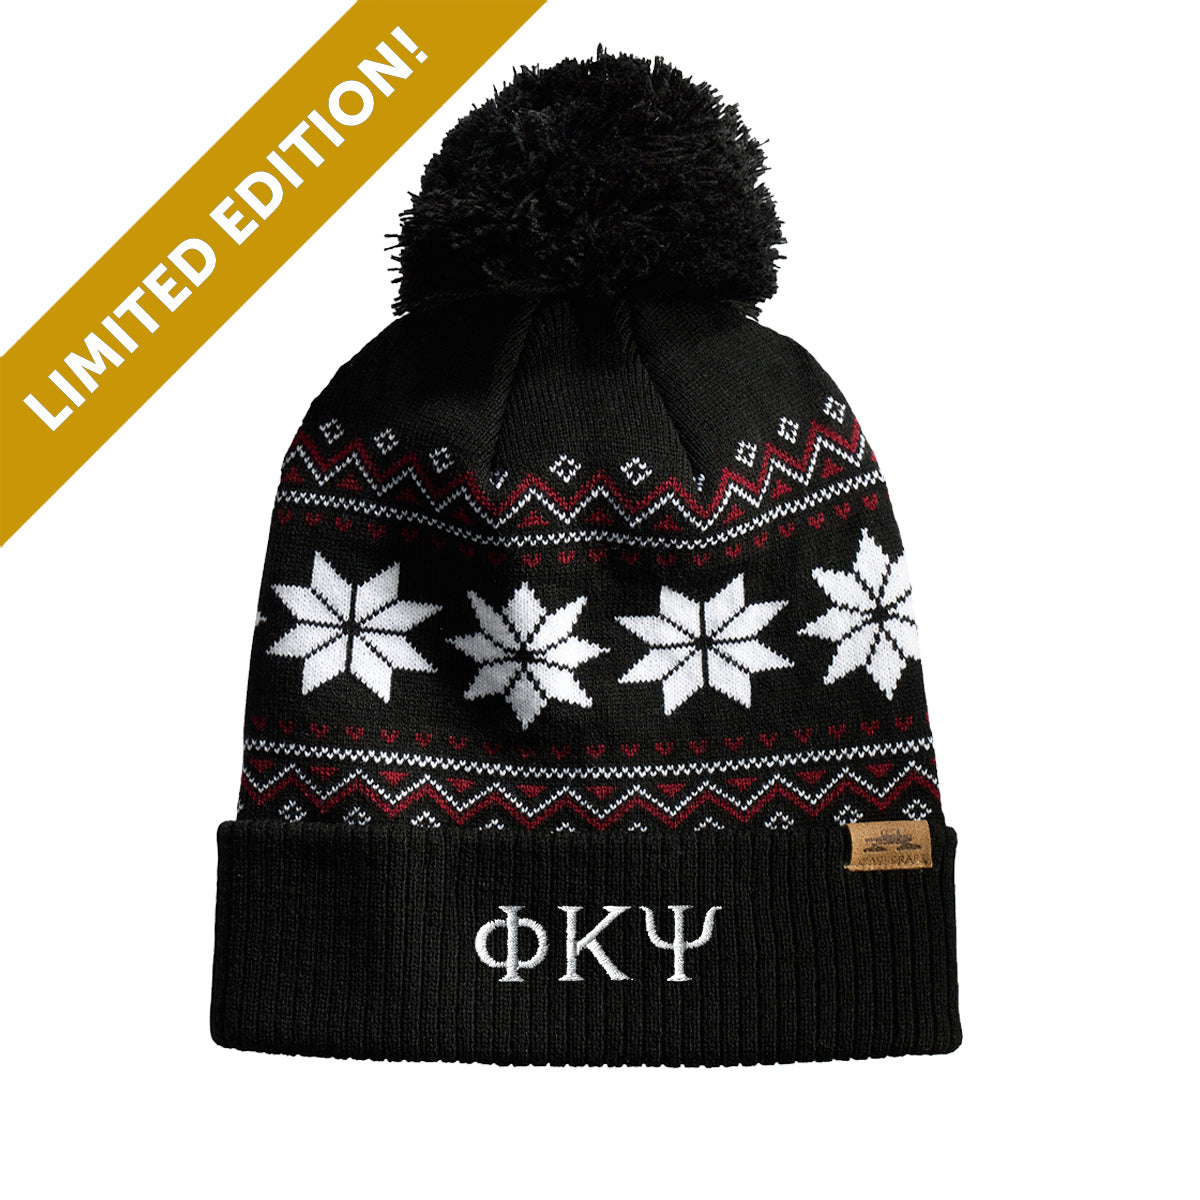 Limited Edition! Phi Psi Knitted Pom Beanie